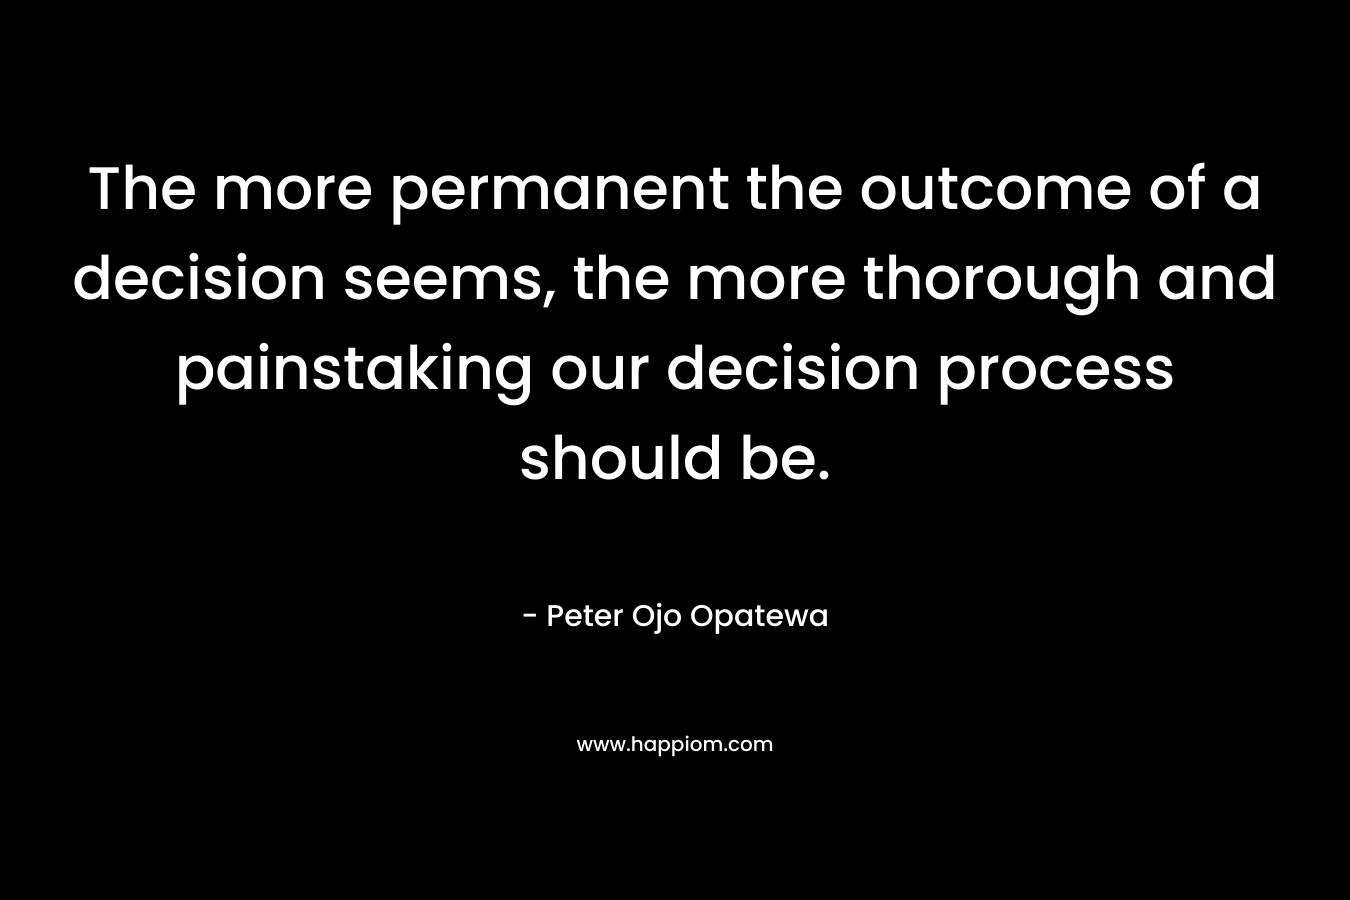 The more permanent the outcome of a decision seems, the more thorough and painstaking our decision process should be. – Peter Ojo Opatewa